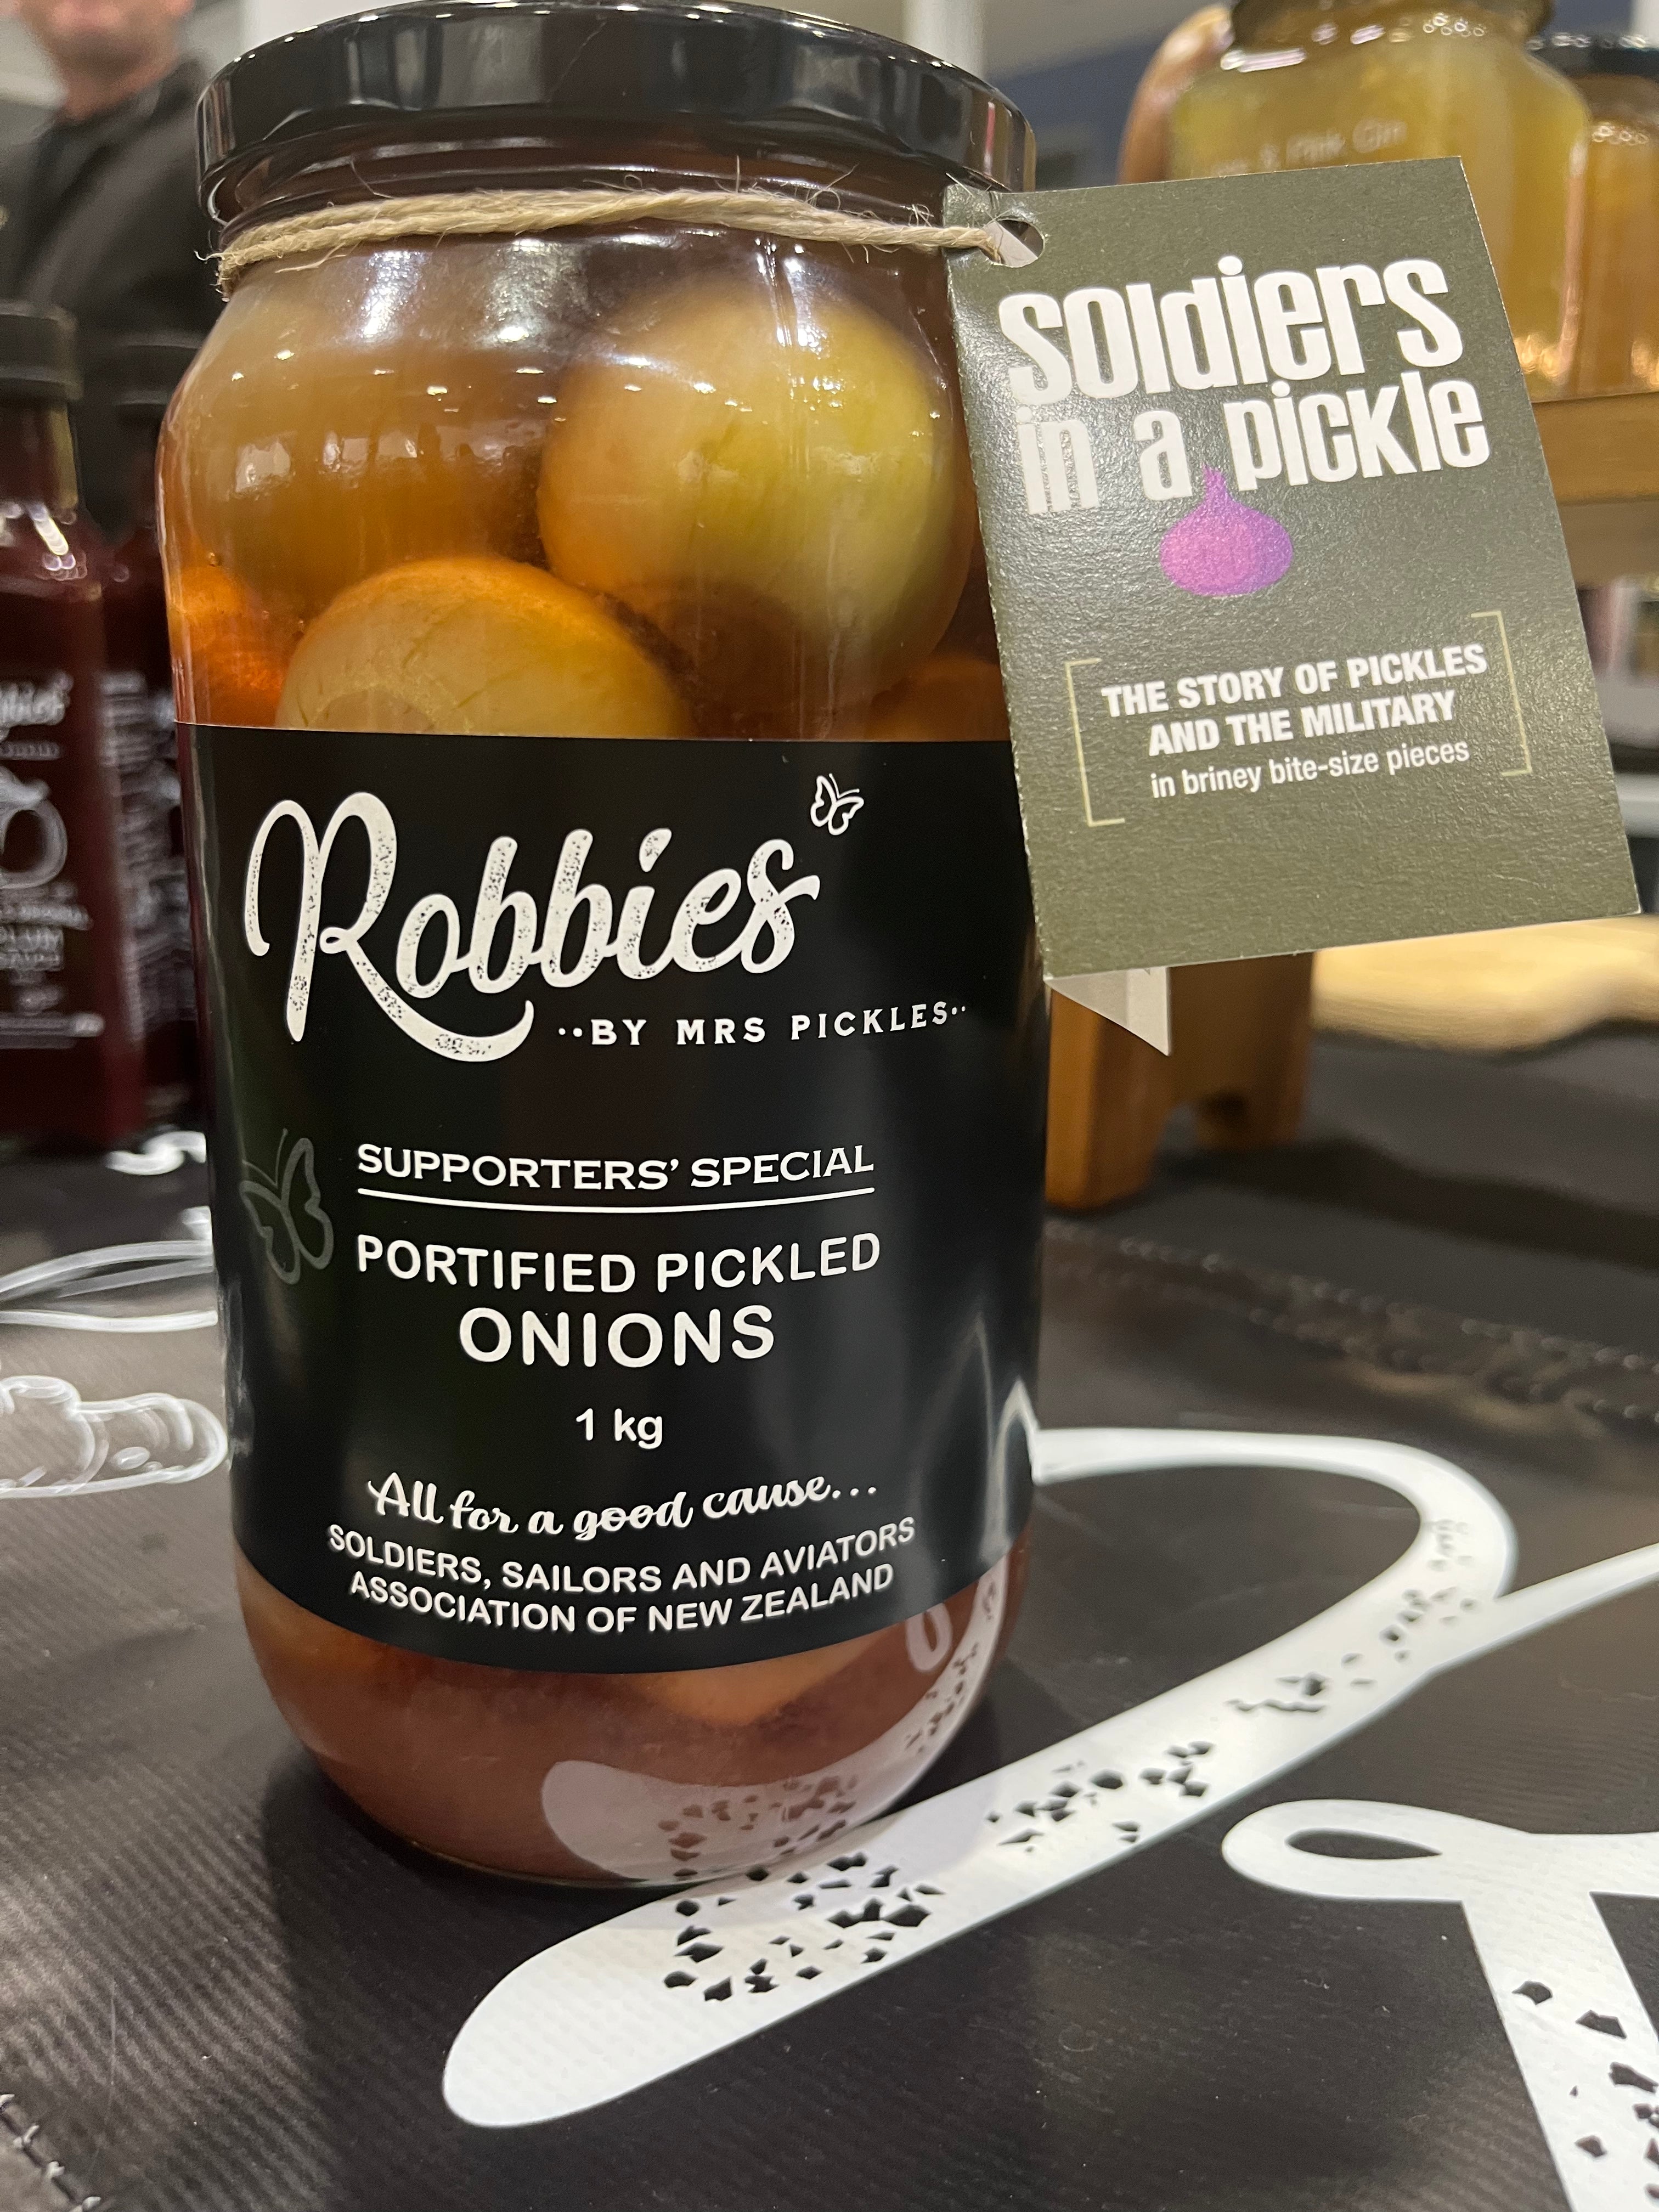 NEW: Portified Pickled Onion 1 kg *Supporters Special* All for a good cause